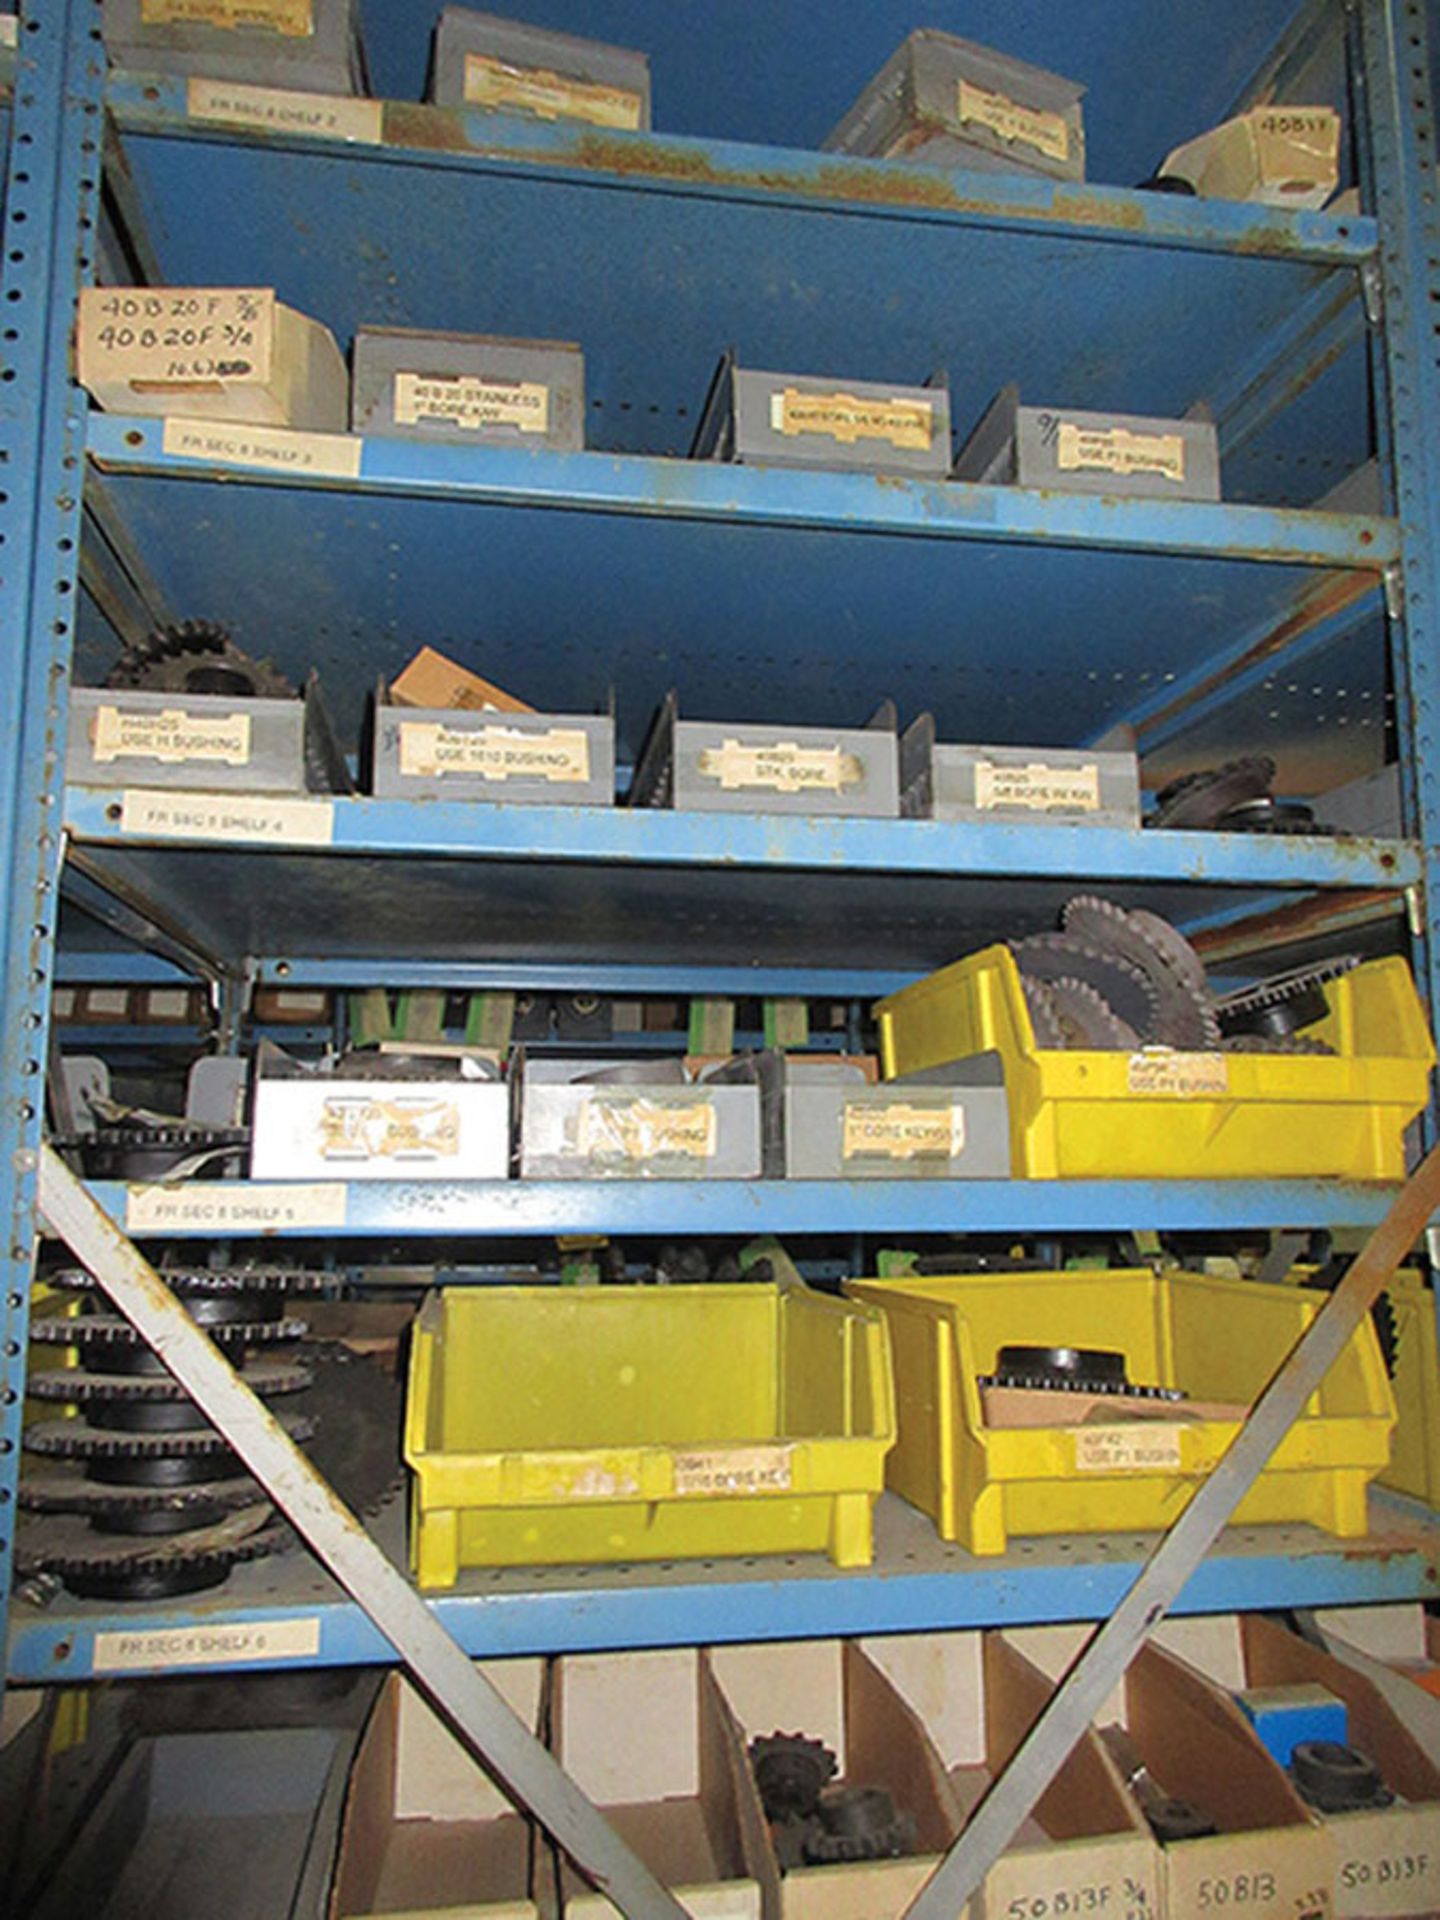 CONTENTS OF (1) SIDE, (5) SECTIONS OF SHELF UNIT: LARGE QUANTITY OF SOCKETS - MANY SIZES; BUSSMAN - Image 8 of 10